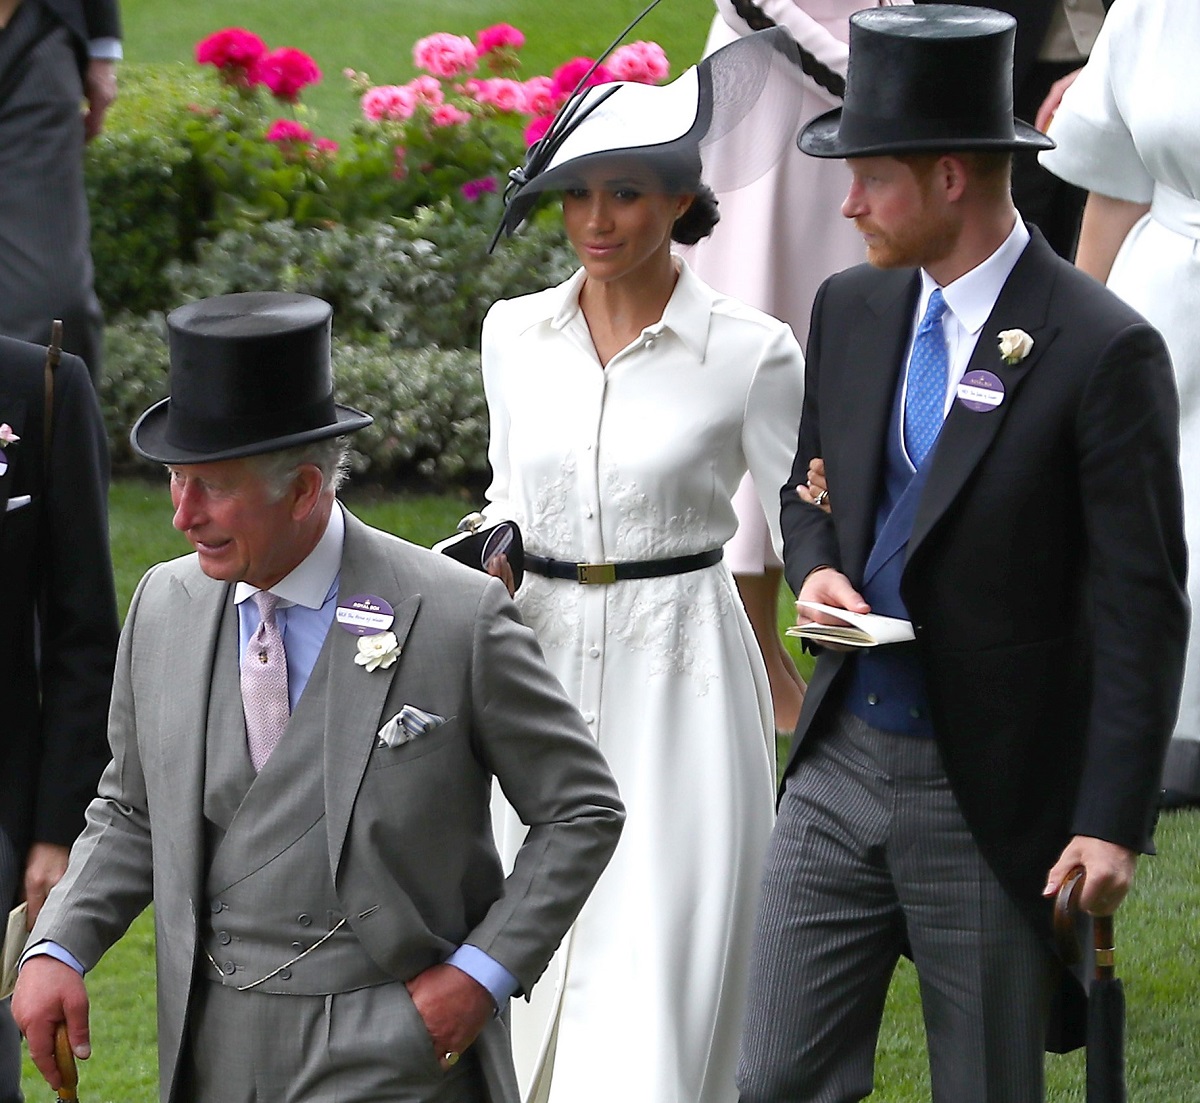 King Charles III, Meghan Markle, and Prince Harry attend attend day 1 of Royal Ascot